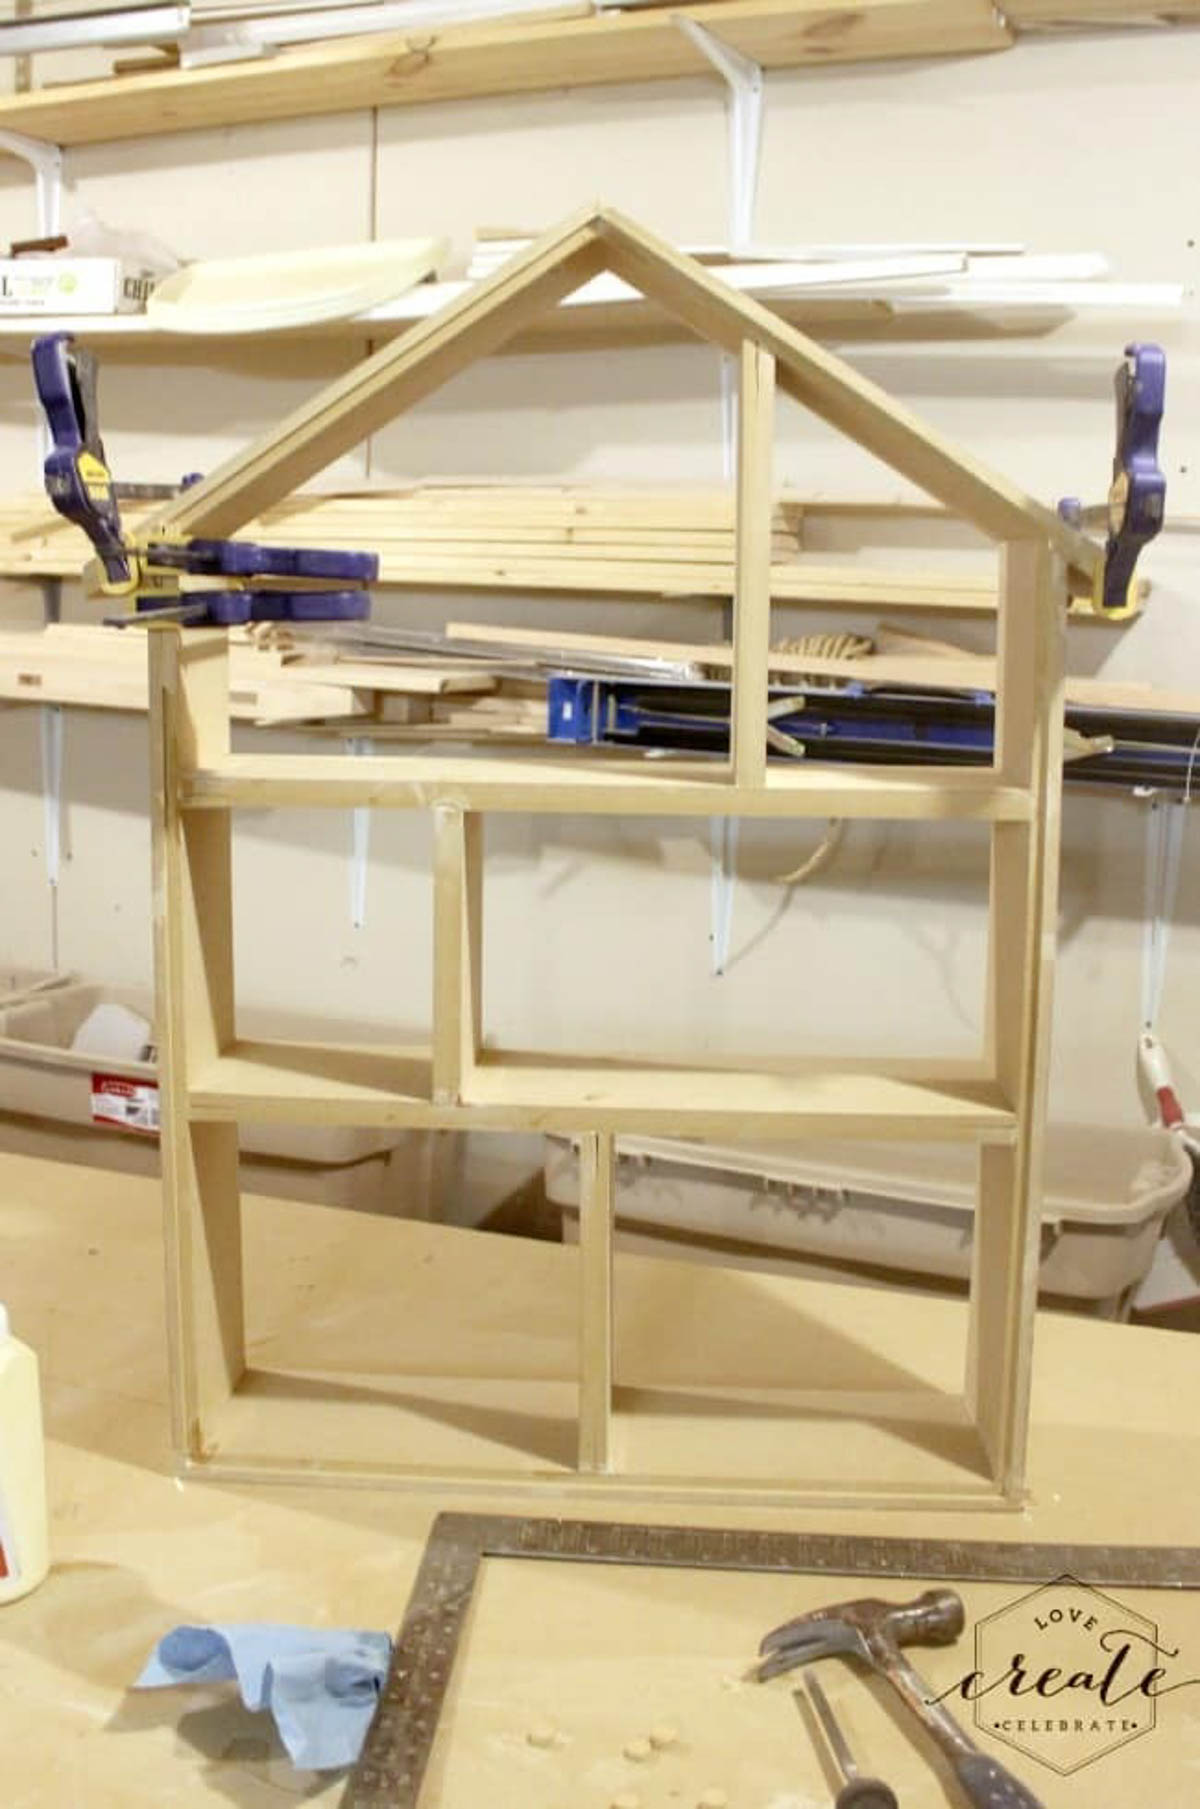 Framed house bookshelf being held together with clamps